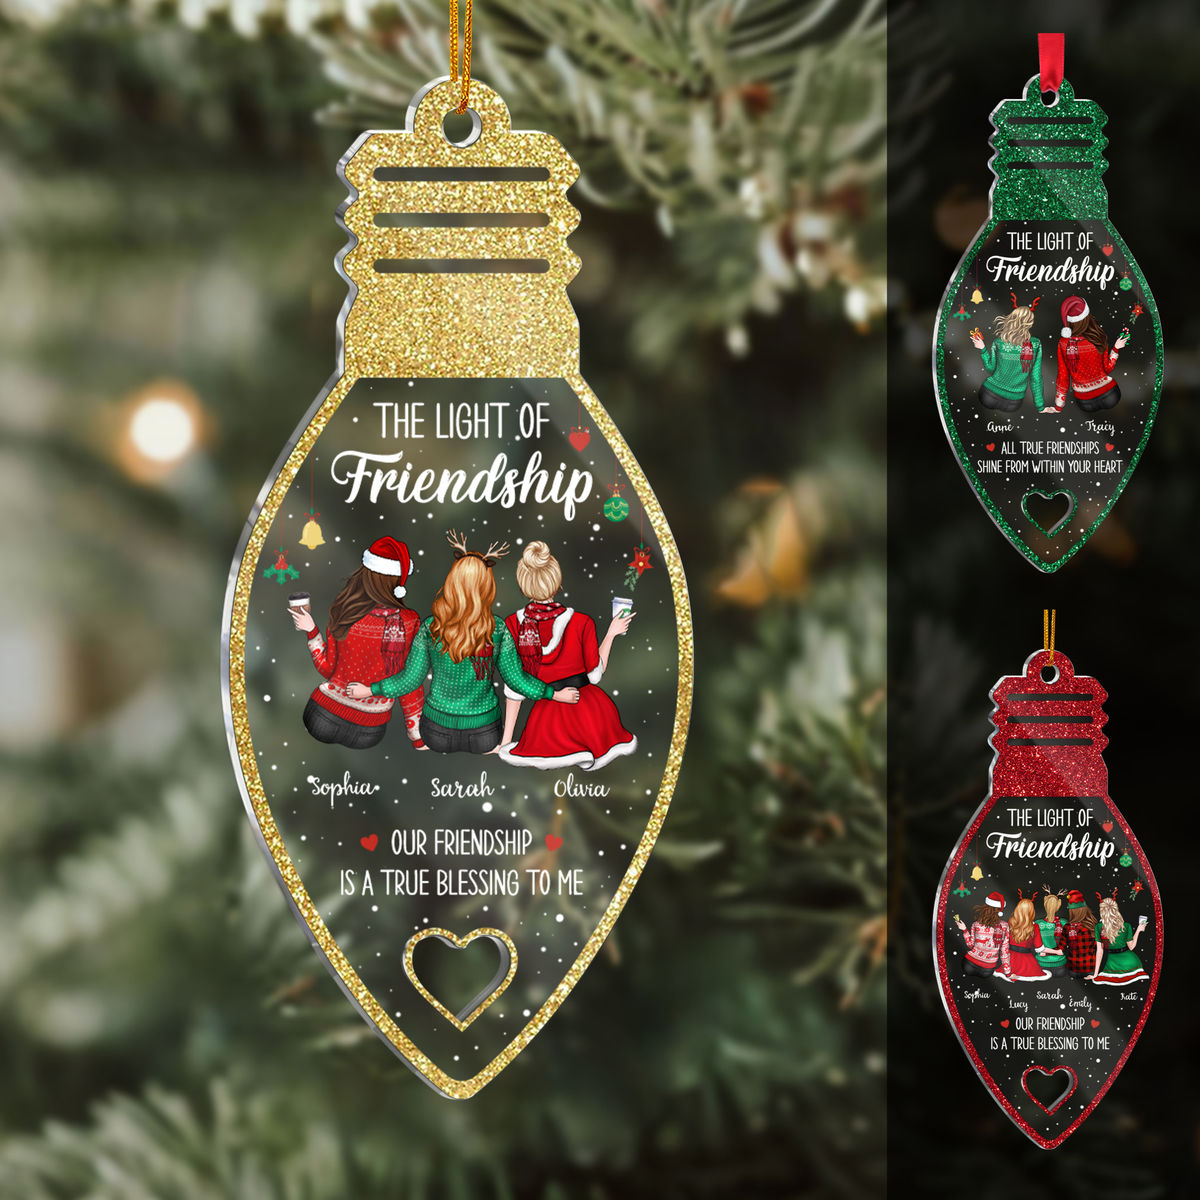 Transparent Christmas Ornament - The Light of Friendship - Friendship is a true blessing to me (UQ)_2